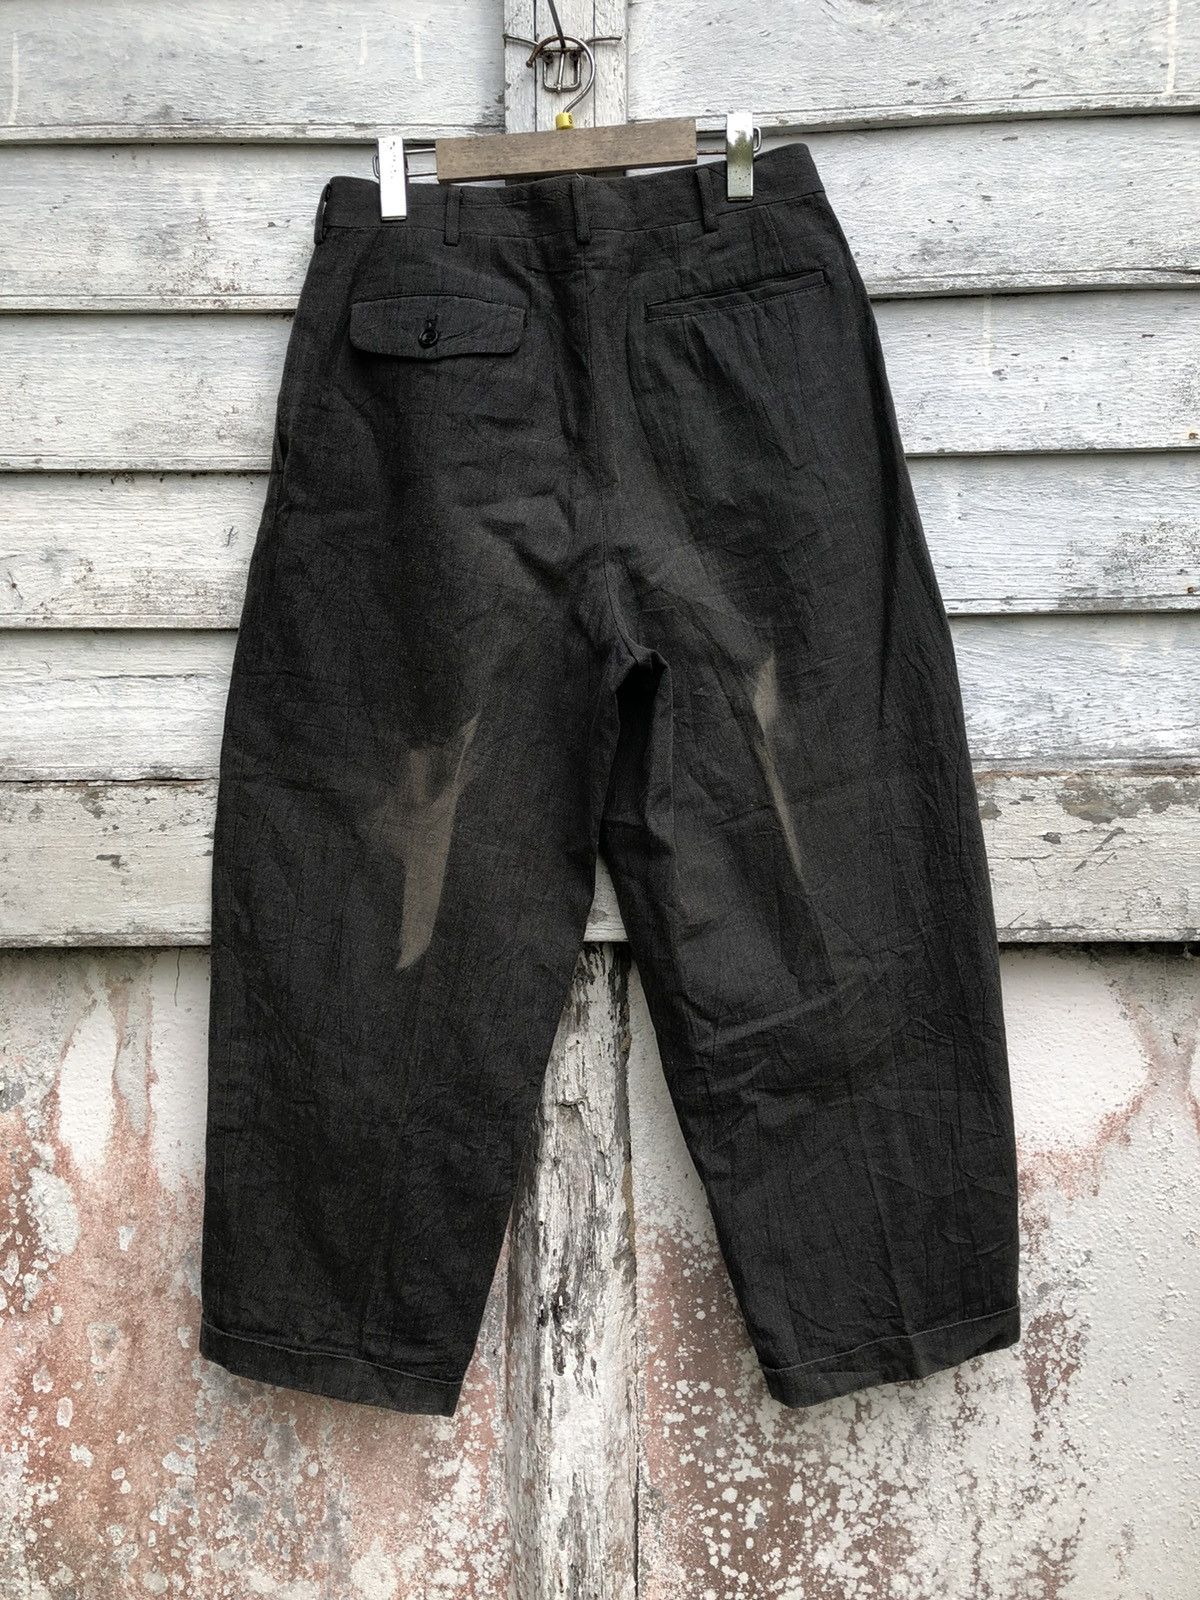 Comme Des Garcon AD 99 Chinos Baggy Cropped Pant - 4